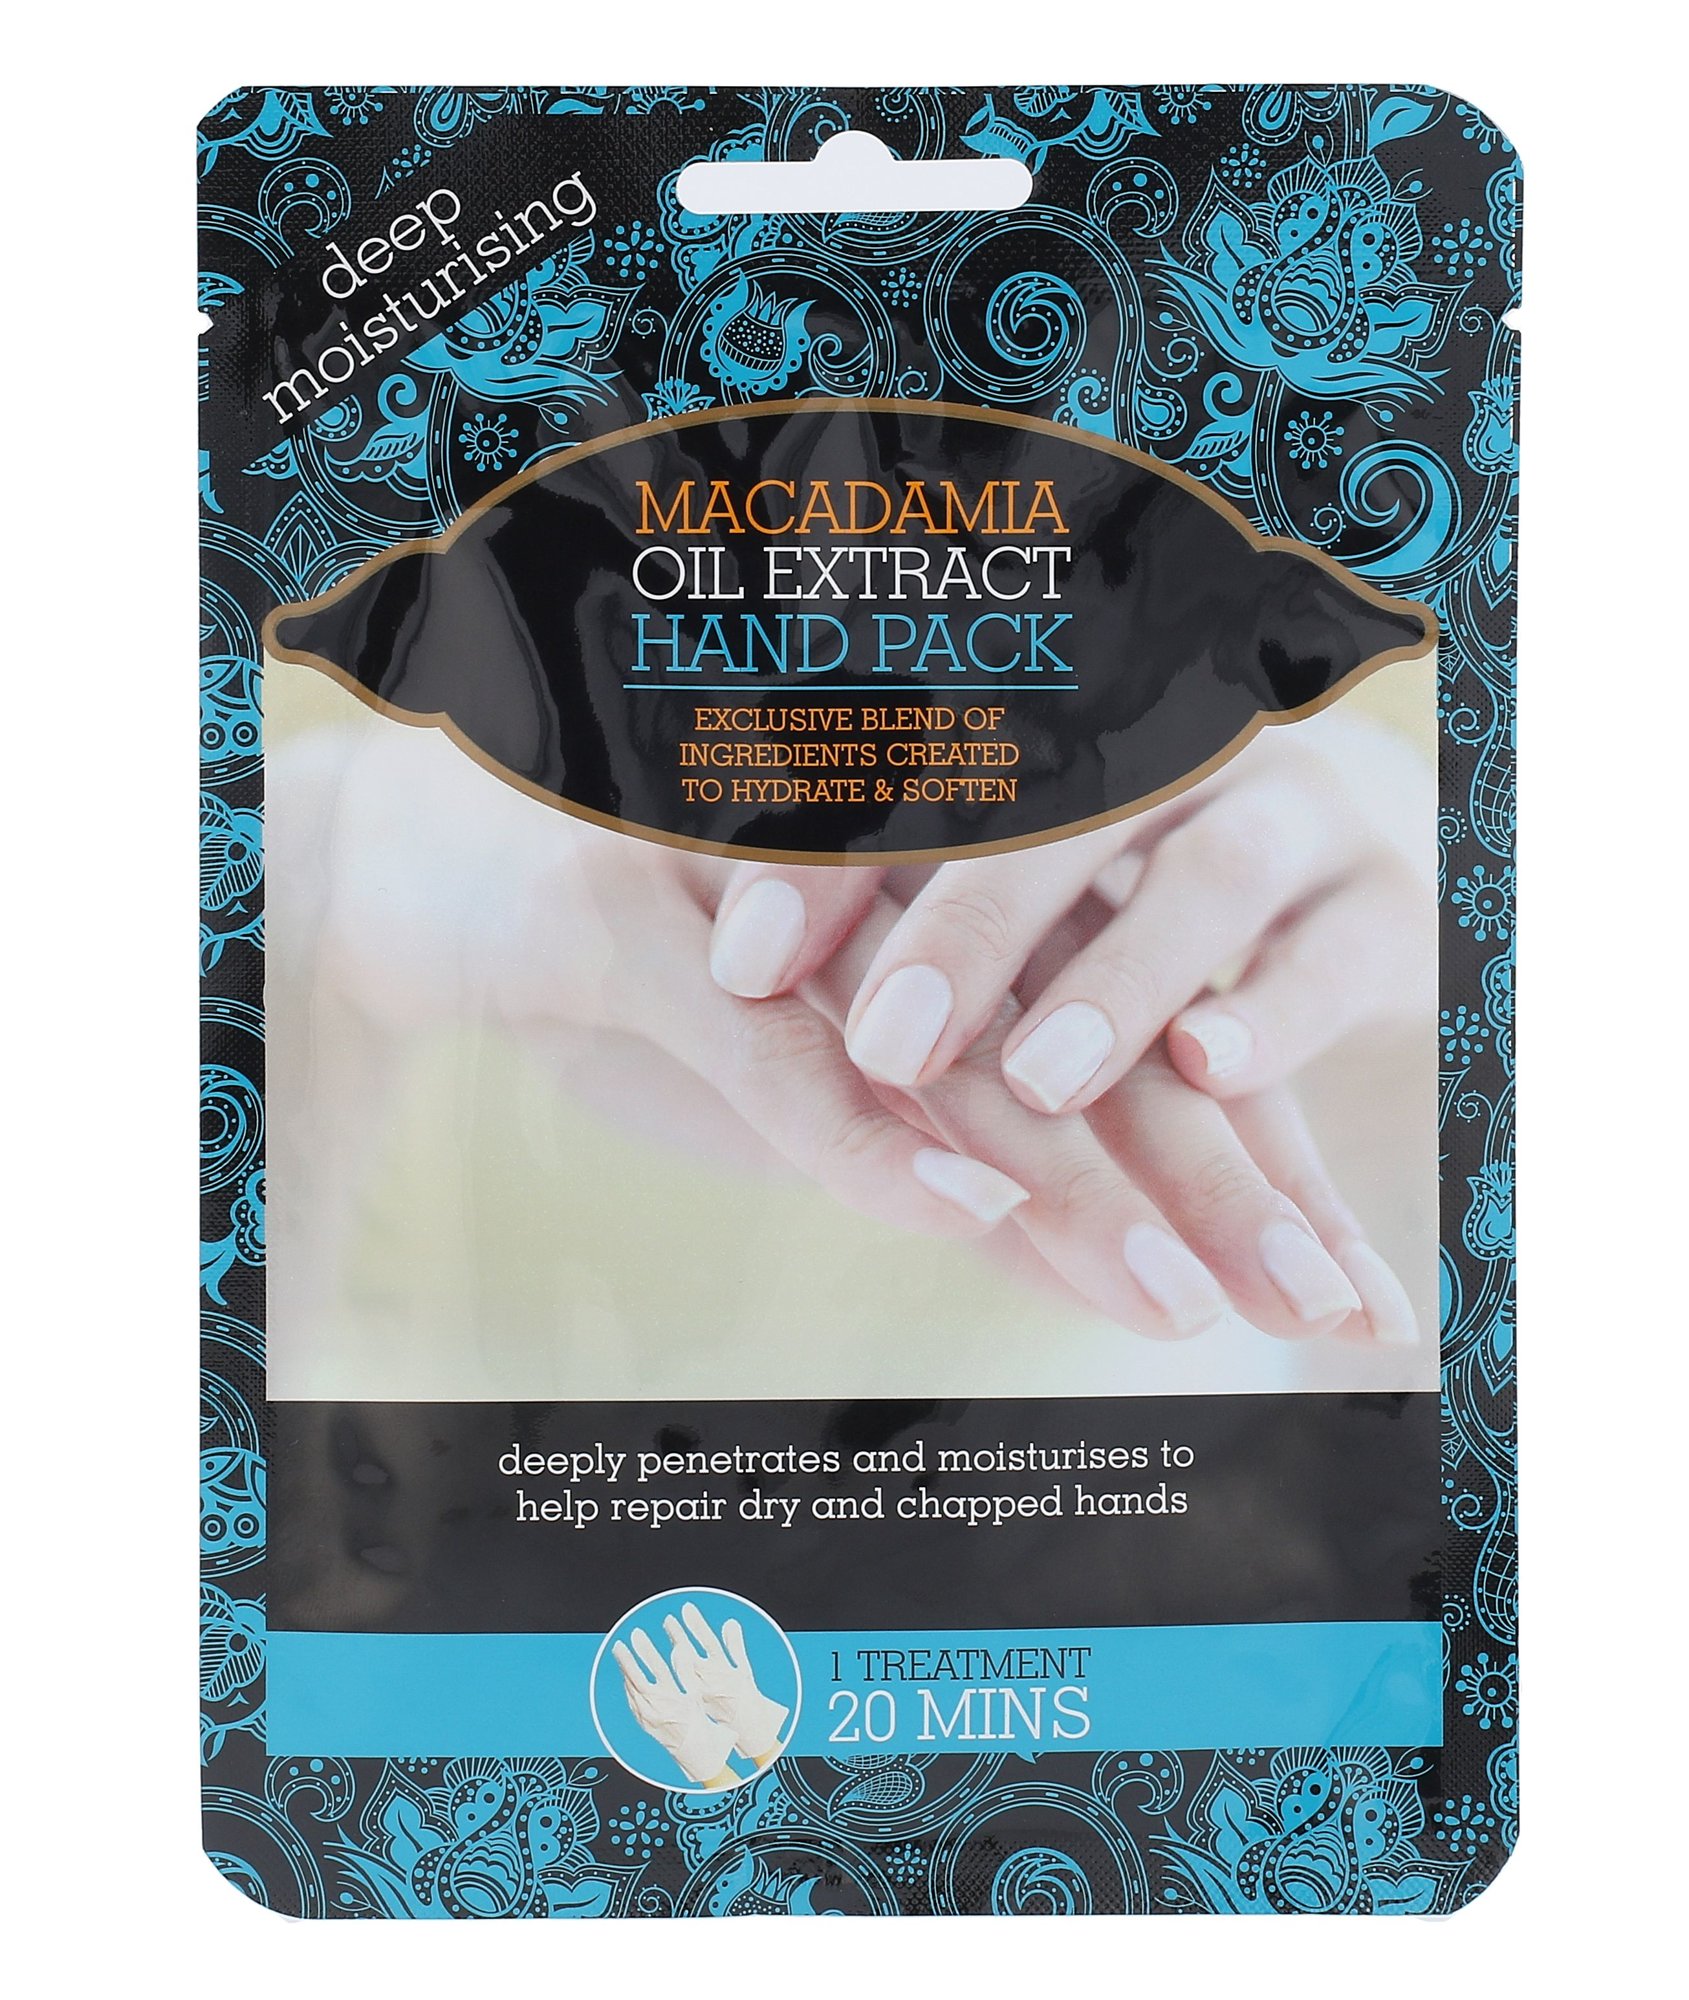 Xpel Macadamia Oil Extract Hand Pack